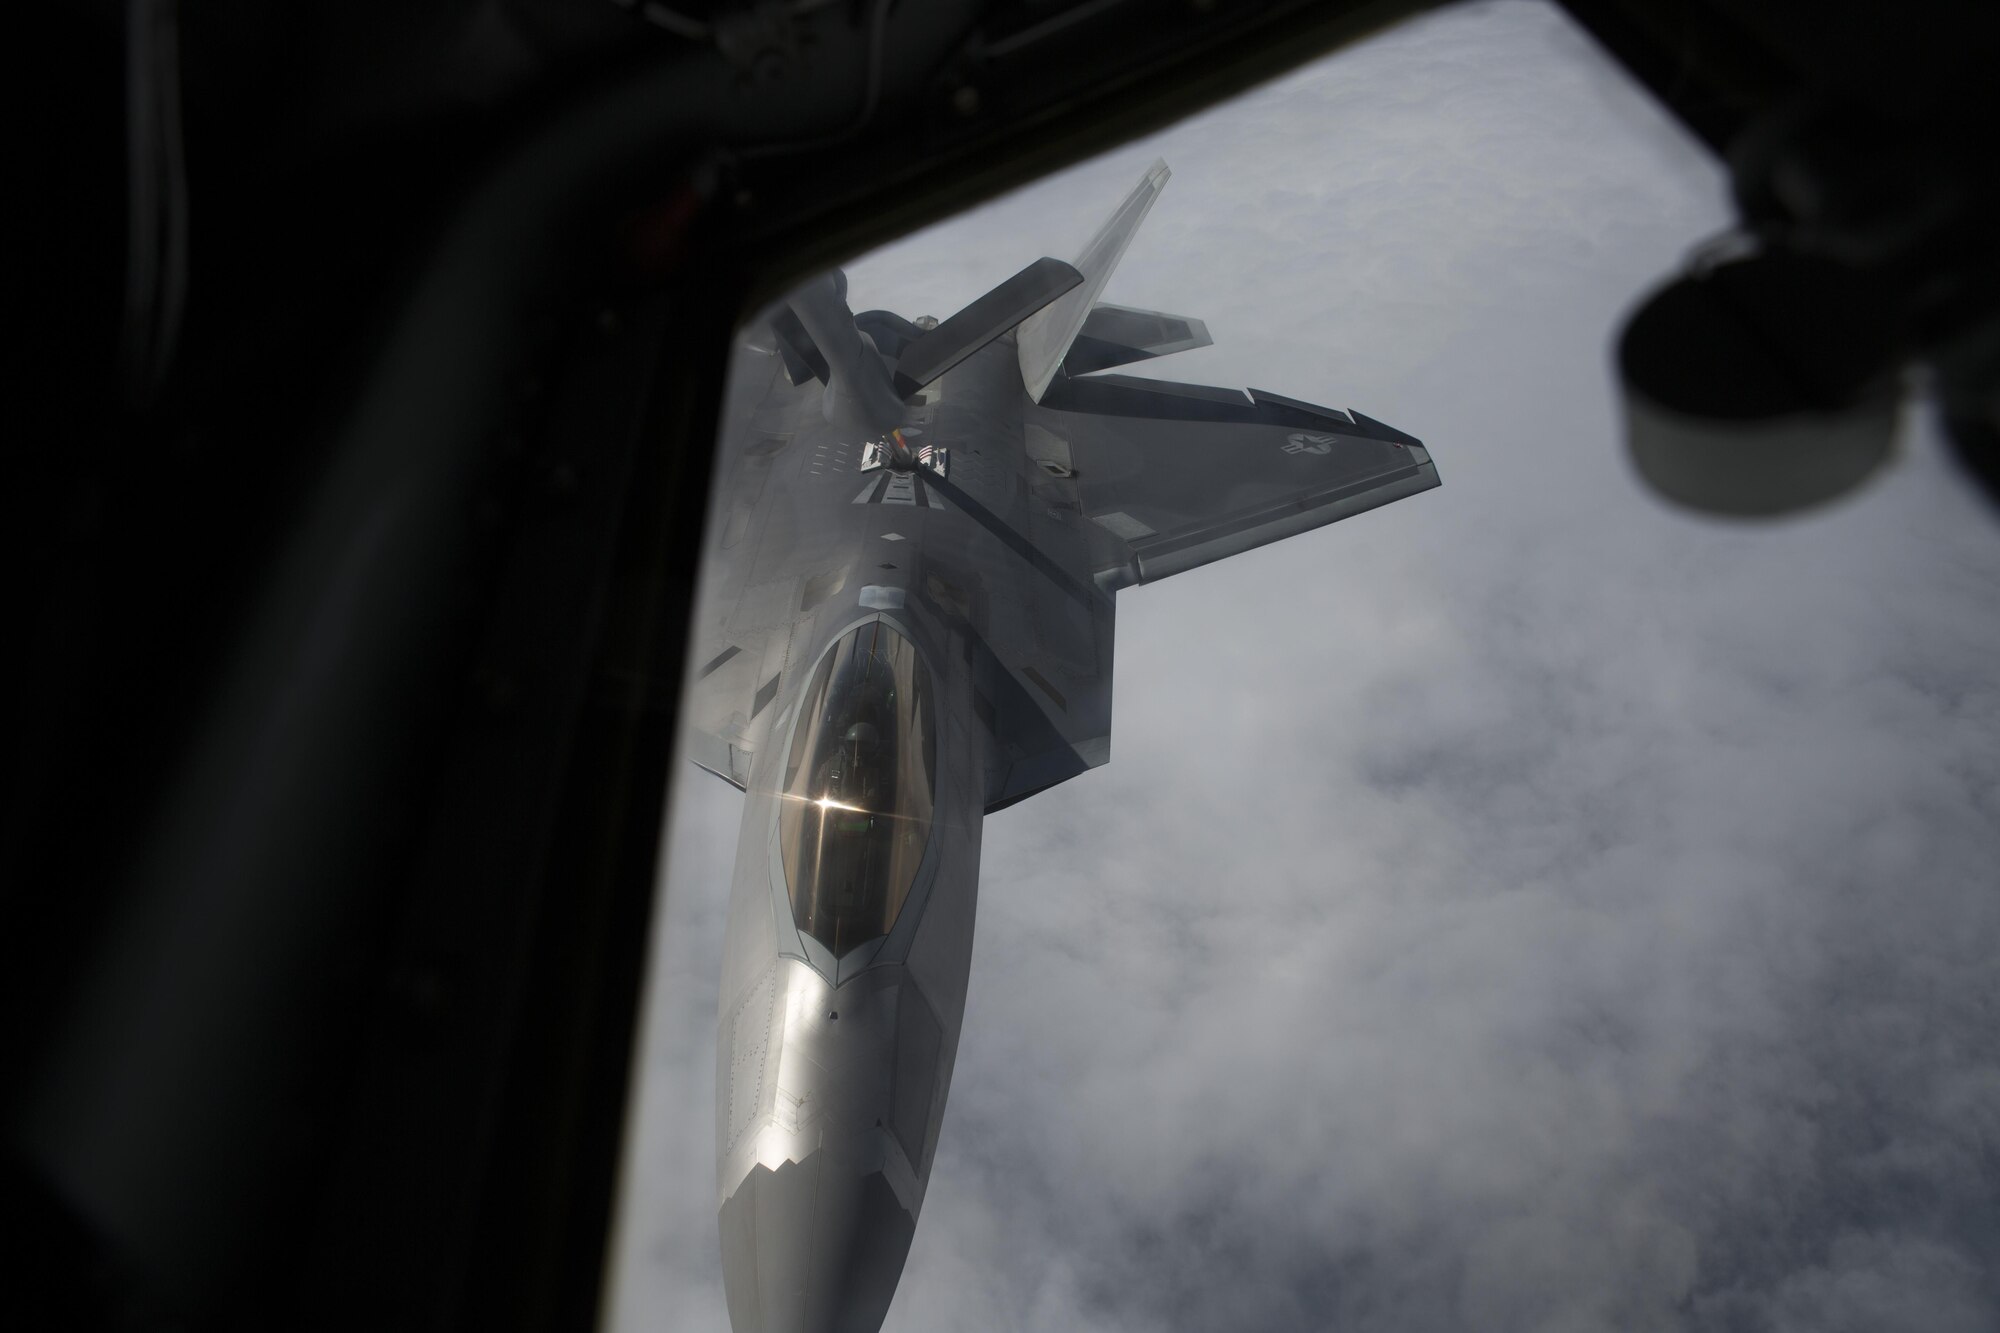 An F-22 Raptor refuels from a KC-135 Stratotanker from the 909th Air Refueling Squadron during Exercise Northern Edge, June 25, 2015. Northern Edge 2015 is Alaska’s premier joint training exercise designed to practice operations, tactics, techniques and procedures as well as enhance interoperability among the services. Thousands of Airmen, Soldiers, Sailors, Marines and Coast Guardsmen from active duty, reserve and National Guard units, including tankers from the 18th Air Refueling Wing out of Kadena Air Force Base, Okinawa, Japan, are involved. (U.S. Marine Corps photo by Cpl. Thor J. Larson/Released)
